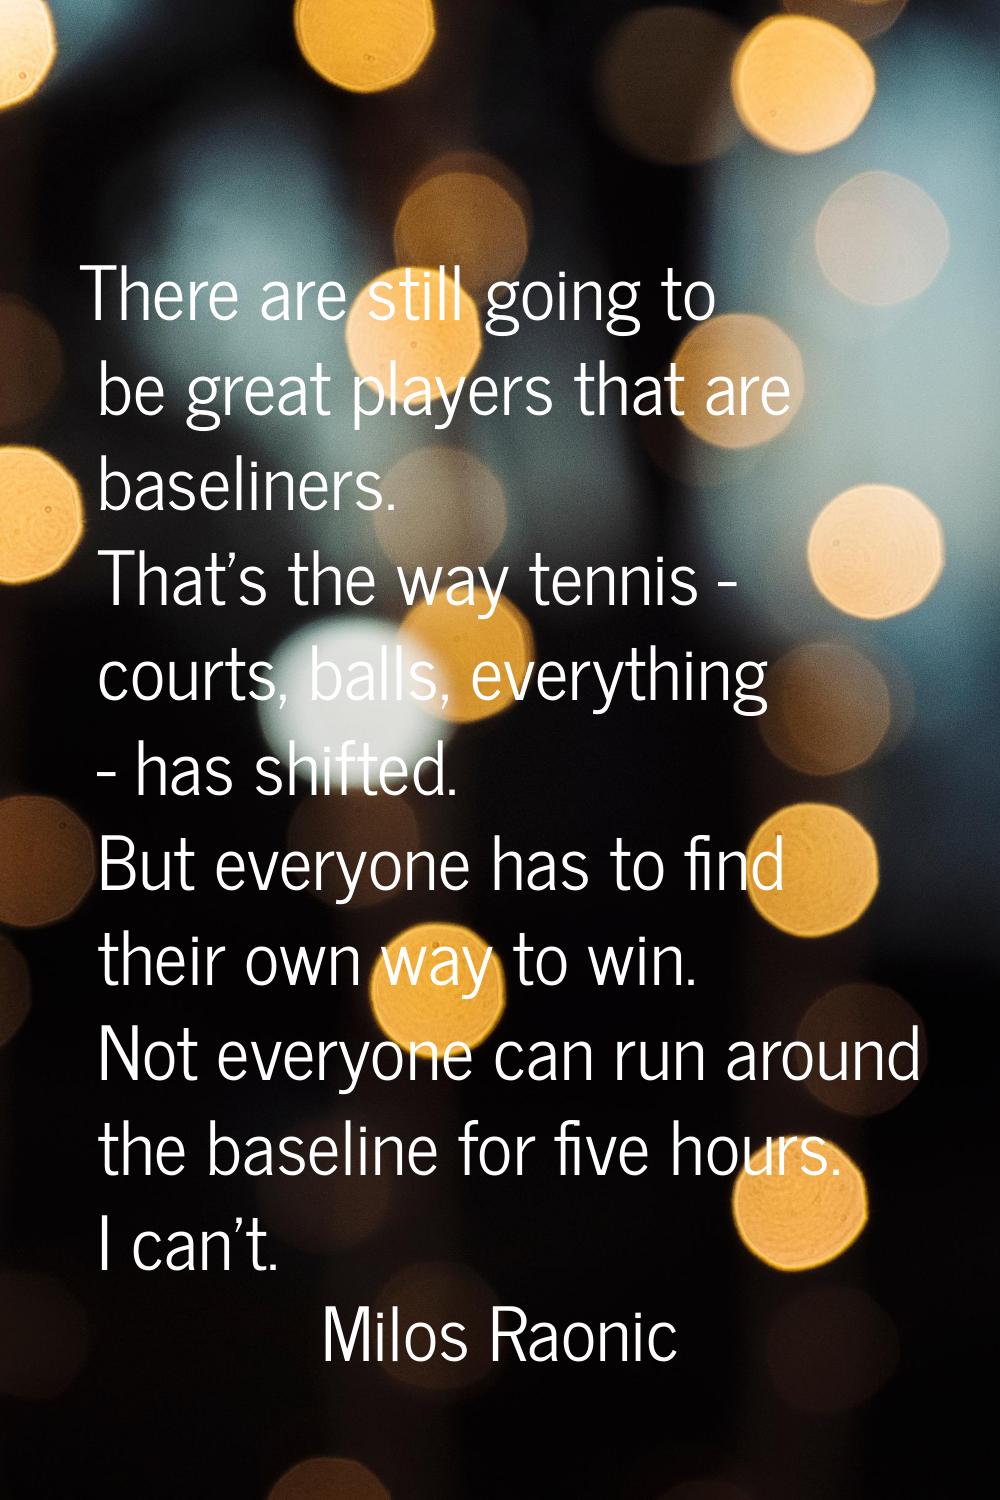 There are still going to be great players that are baseliners. That's the way tennis - courts, ball